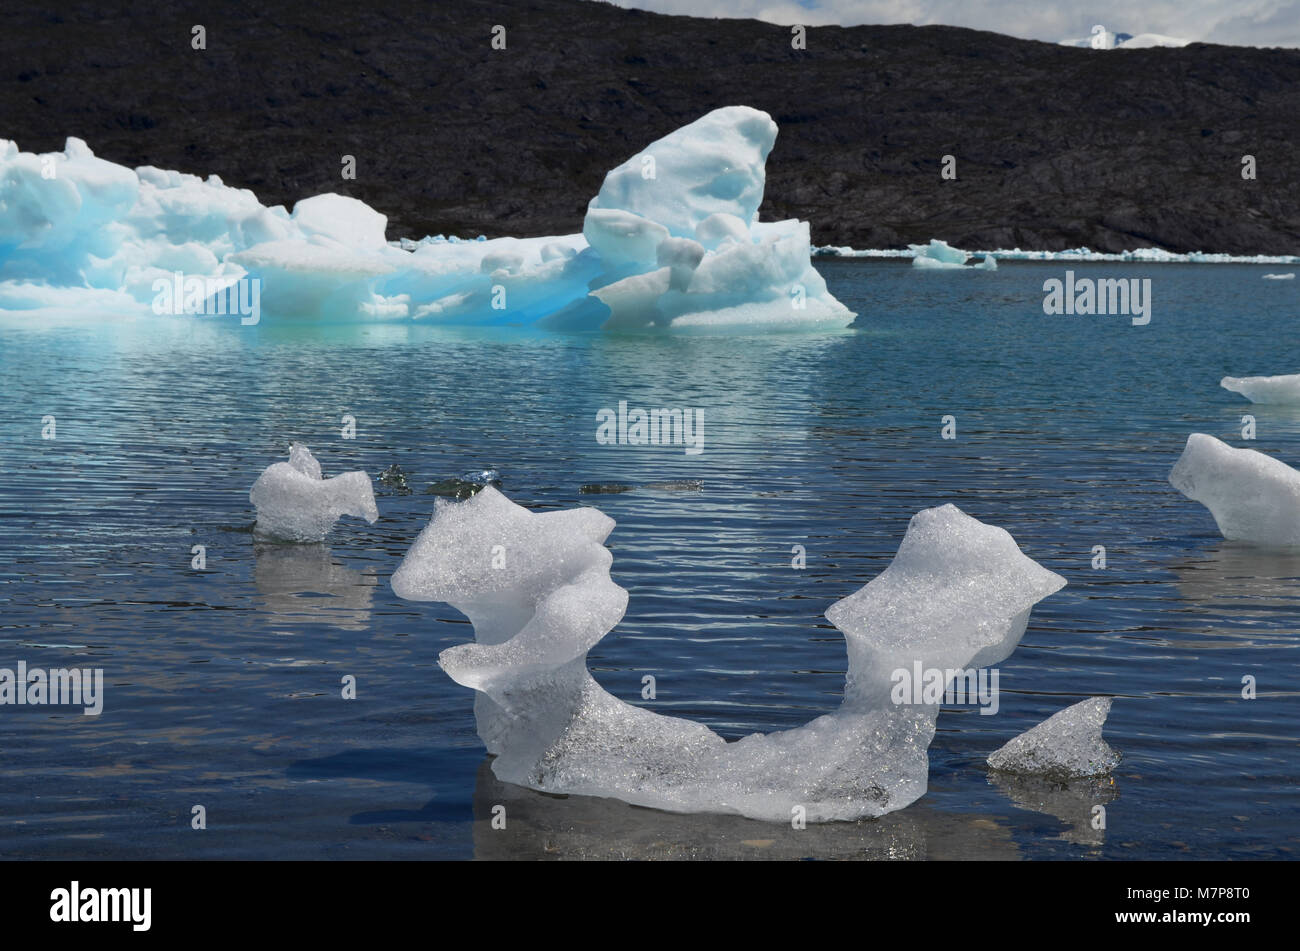 Steffen glacier in Campo de Hielo Sur (Southern Patagonian Ice Field), Chilean Patagonia Stock Photo